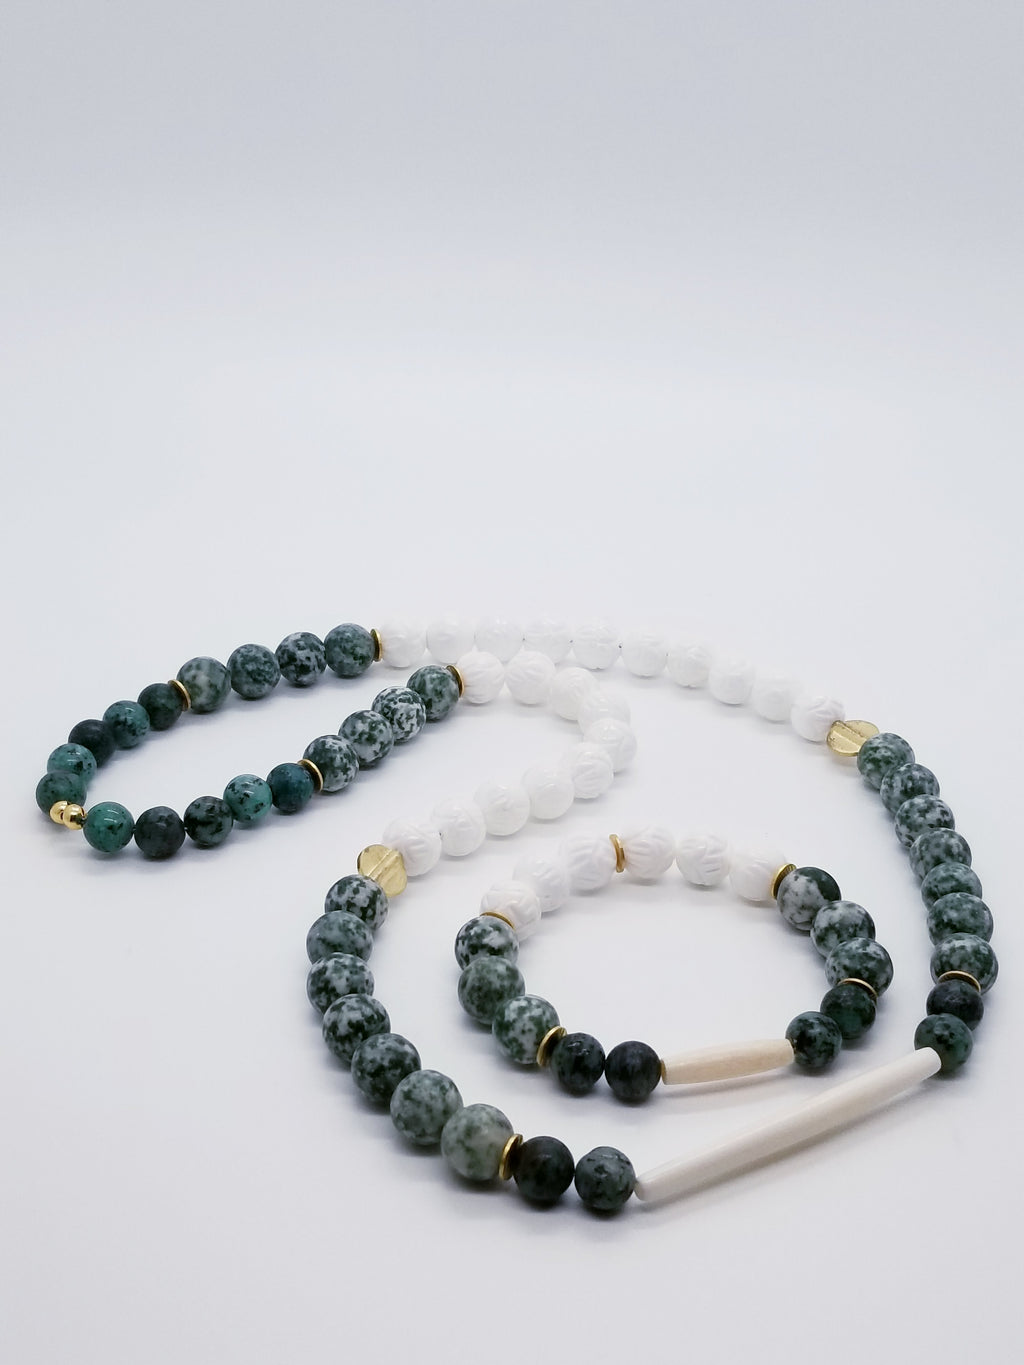 Bracelet: Length- 7.75 inches | Weight: 1.5 ounces  Necklace: Length- 30 inches | 5.2 ounces  Distinctly You! This necklace and bracelet set is handmade using 12mm green and cream speckled matte beads, 12mm white lotus beads, 10mm green speckled beads, brass gold spacers, white hair bone spacer, necklace uses metal cord, and bracelet uses 8mm latex free clear stretch cord.